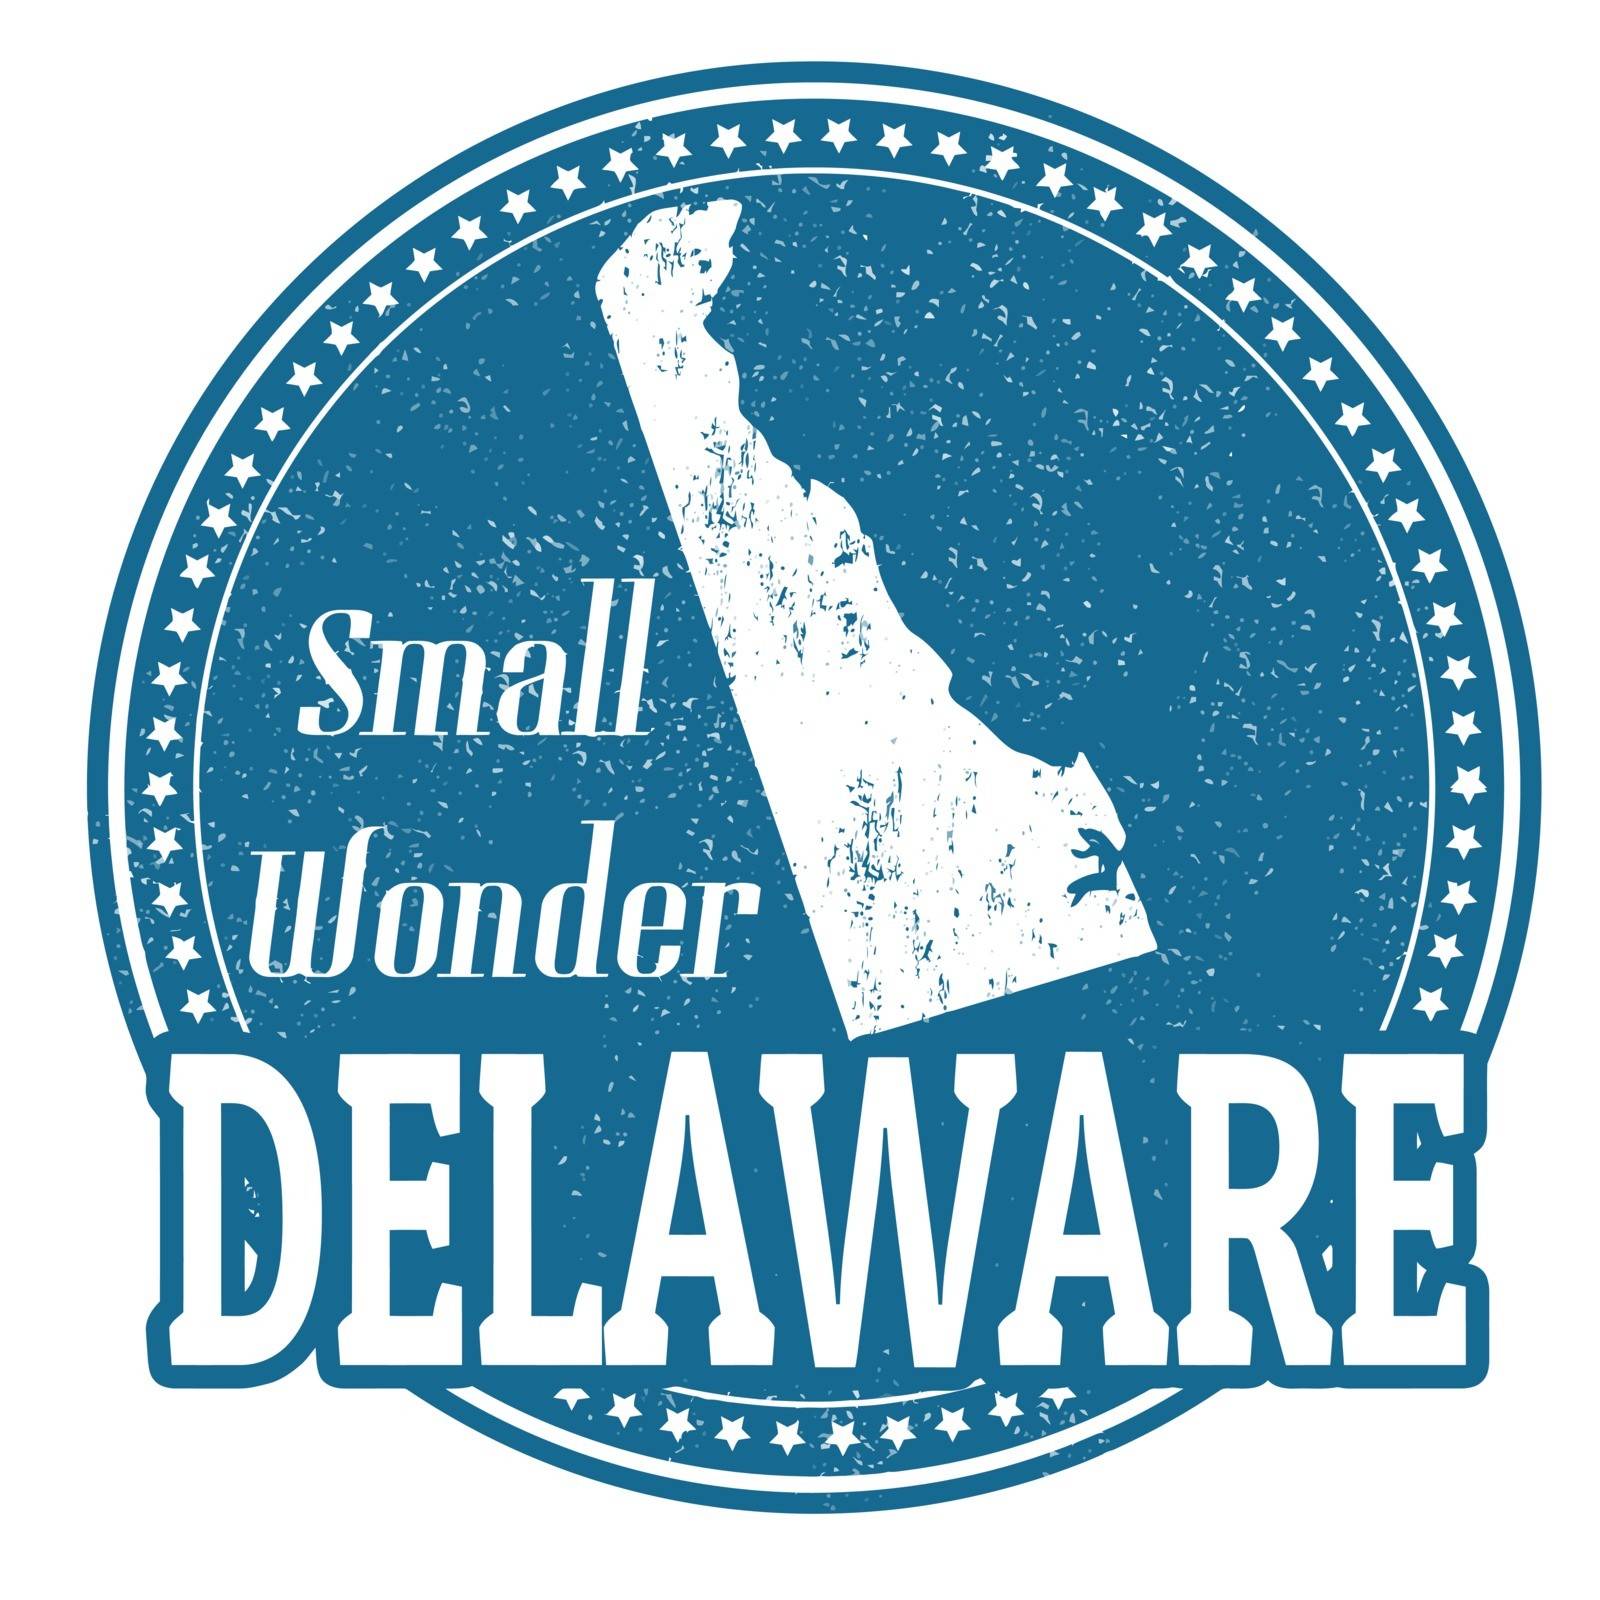 Vintage stamp with text Small Wonder written inside and map of Delaware, vector illustration